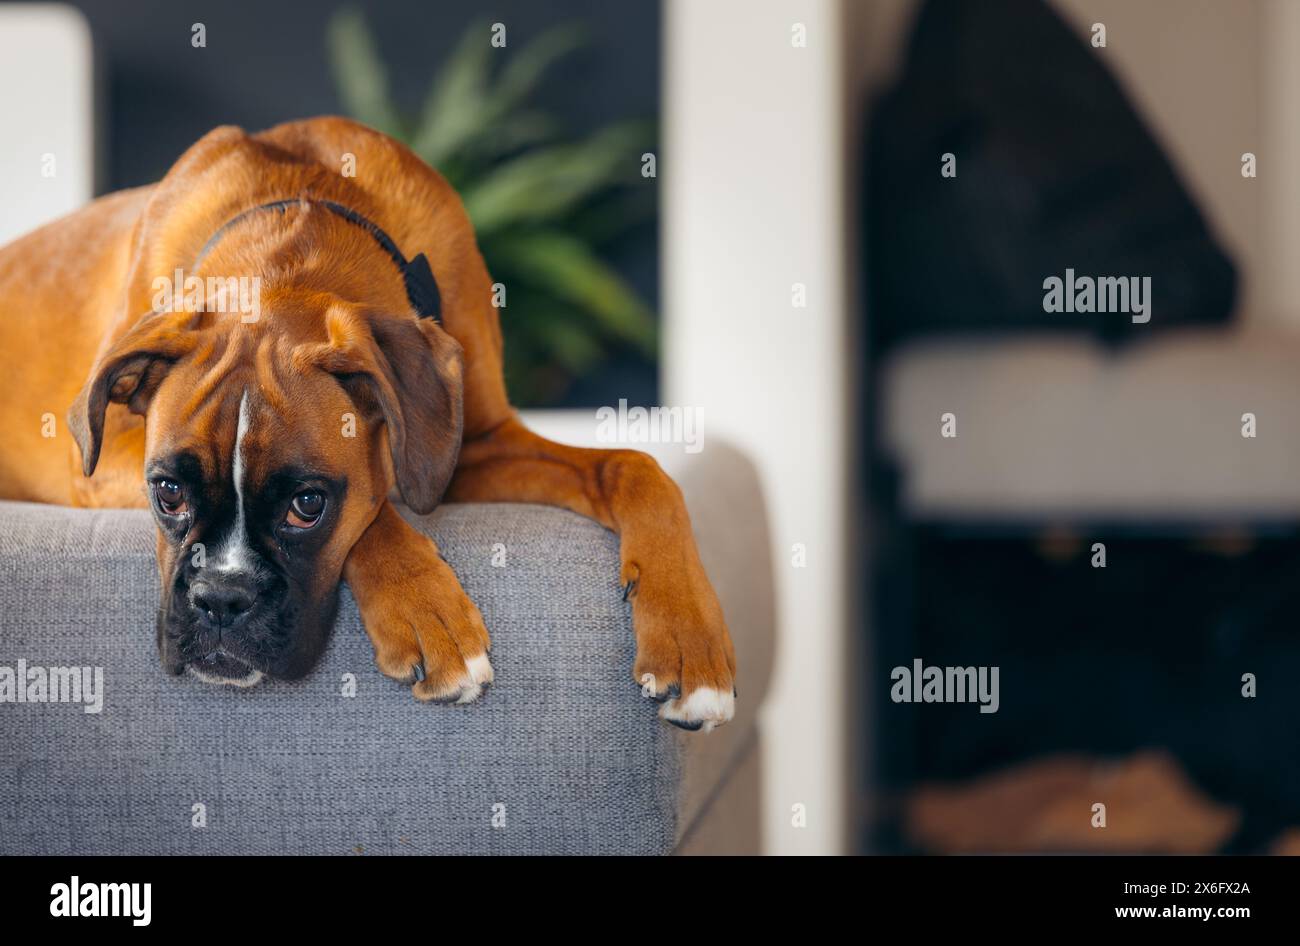 Boxer puppy looking sad on a couch Stock Photo